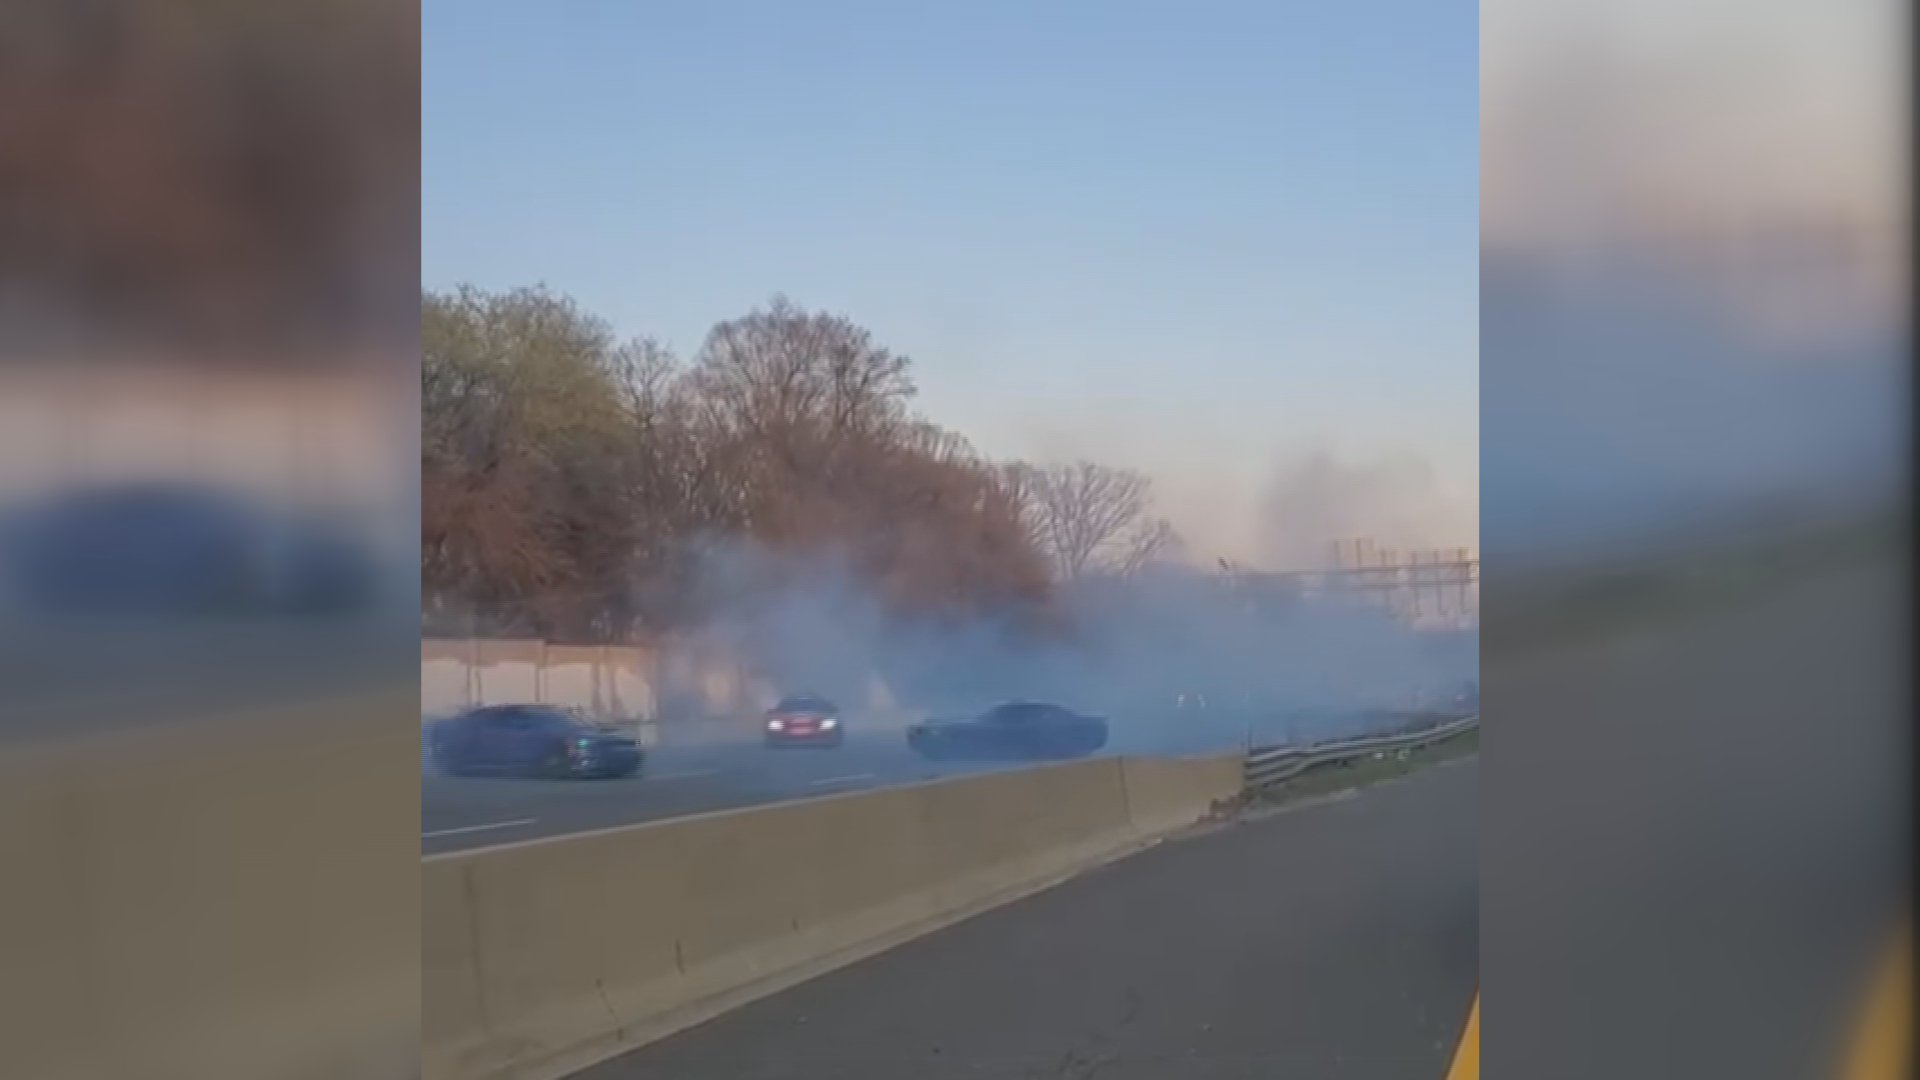 Maryland State Police is charging one driver with 6 traffic citations, including reckless driving, in connection to the incident.